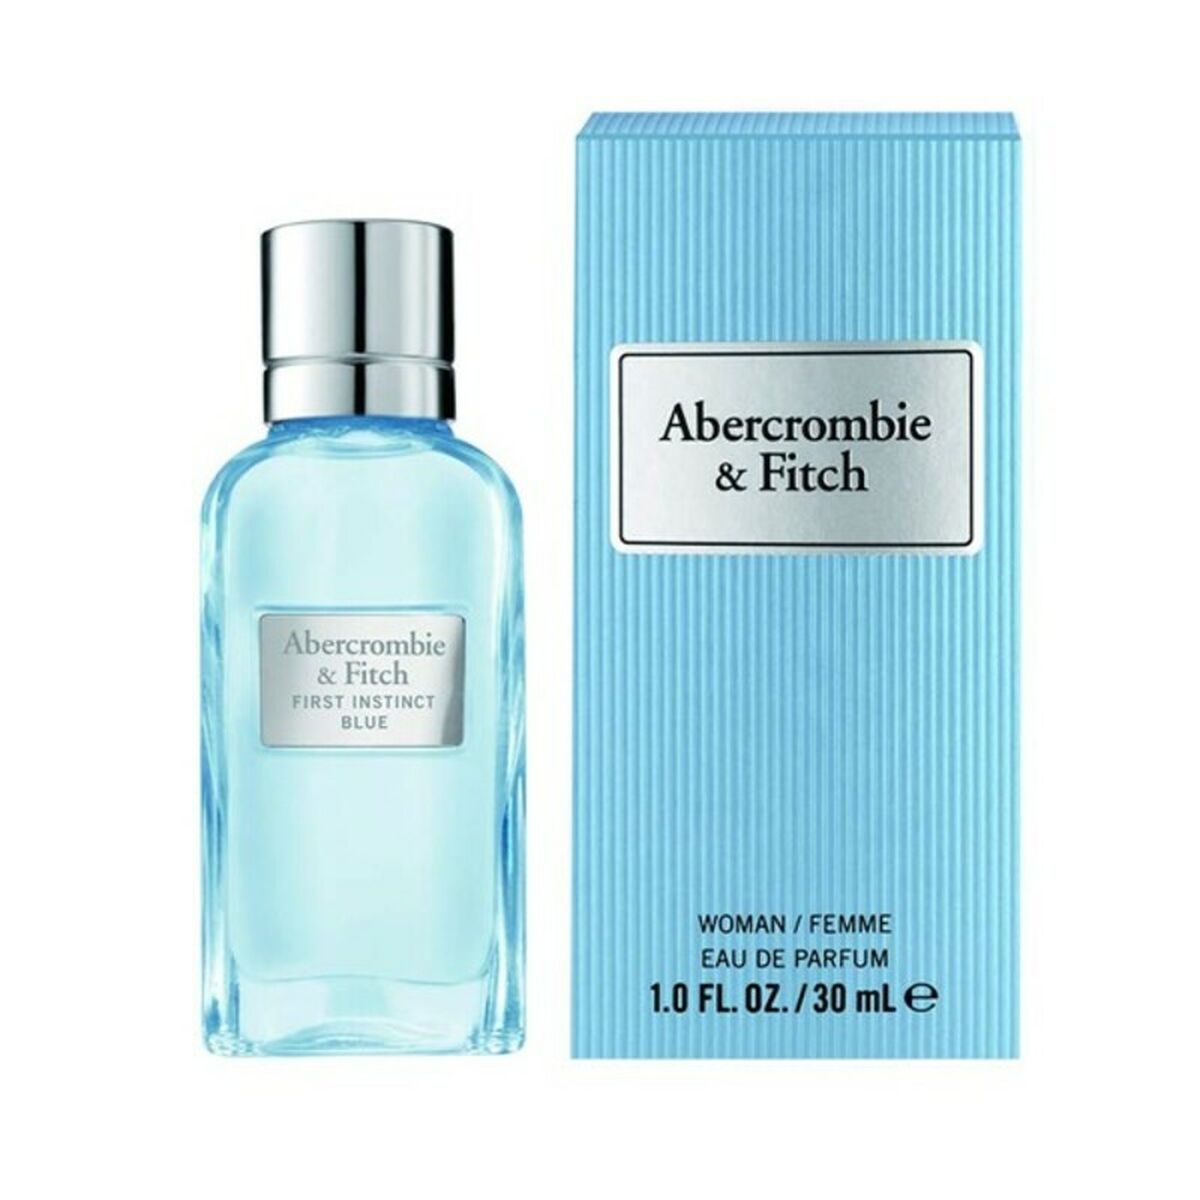 Dame parfyme First Instinct Blue Abercrombie & Fitch EDP